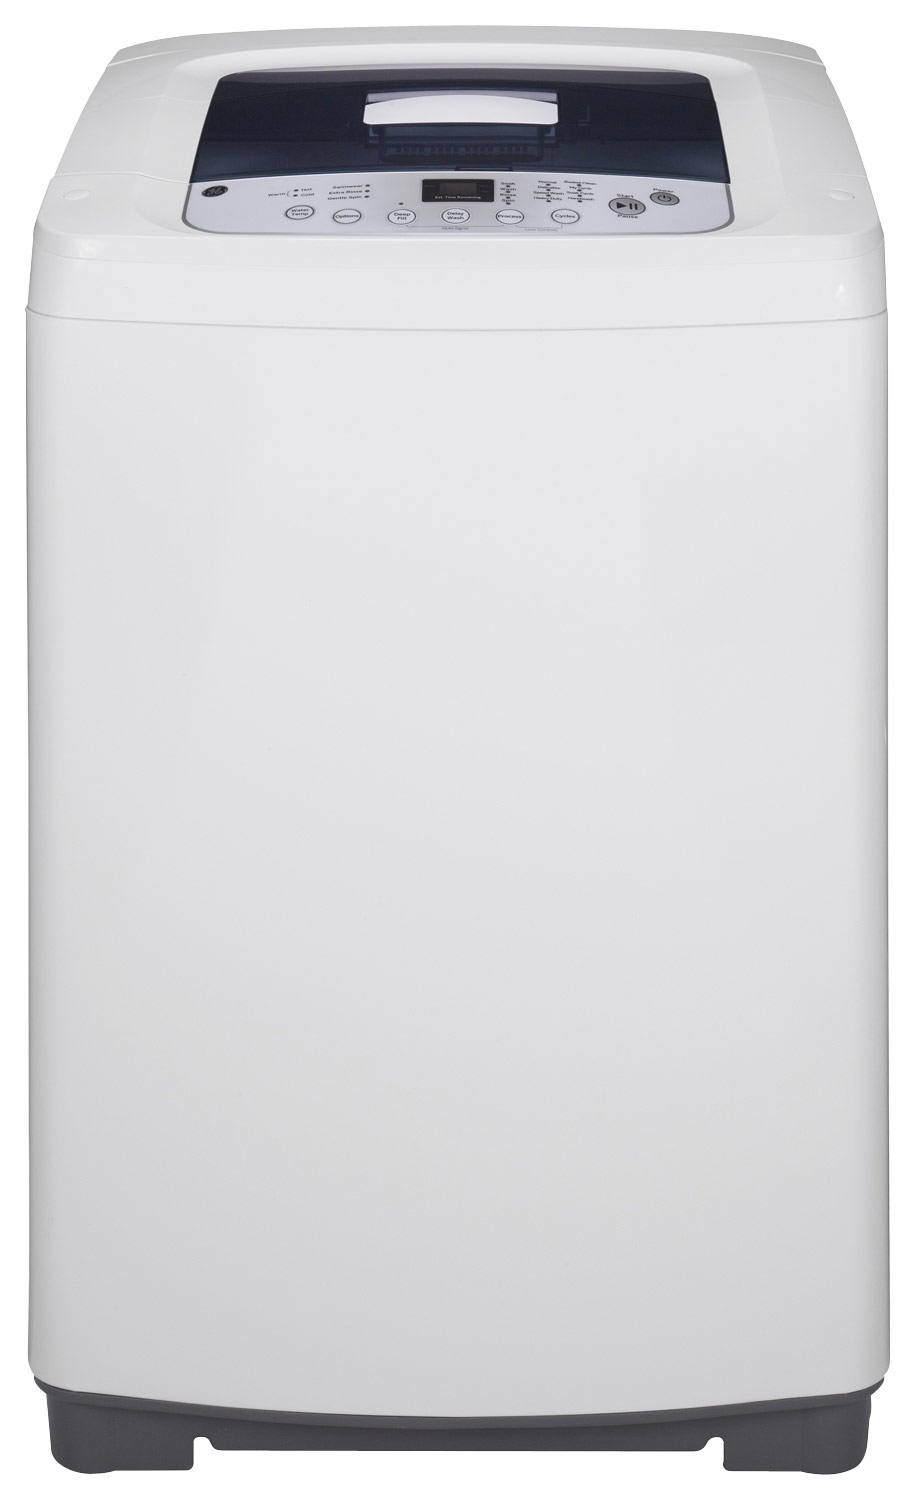  GE - Spacemaker 2.6 Cu. Ft. 8-Cycle Compact Top-Loading Washer - White on White